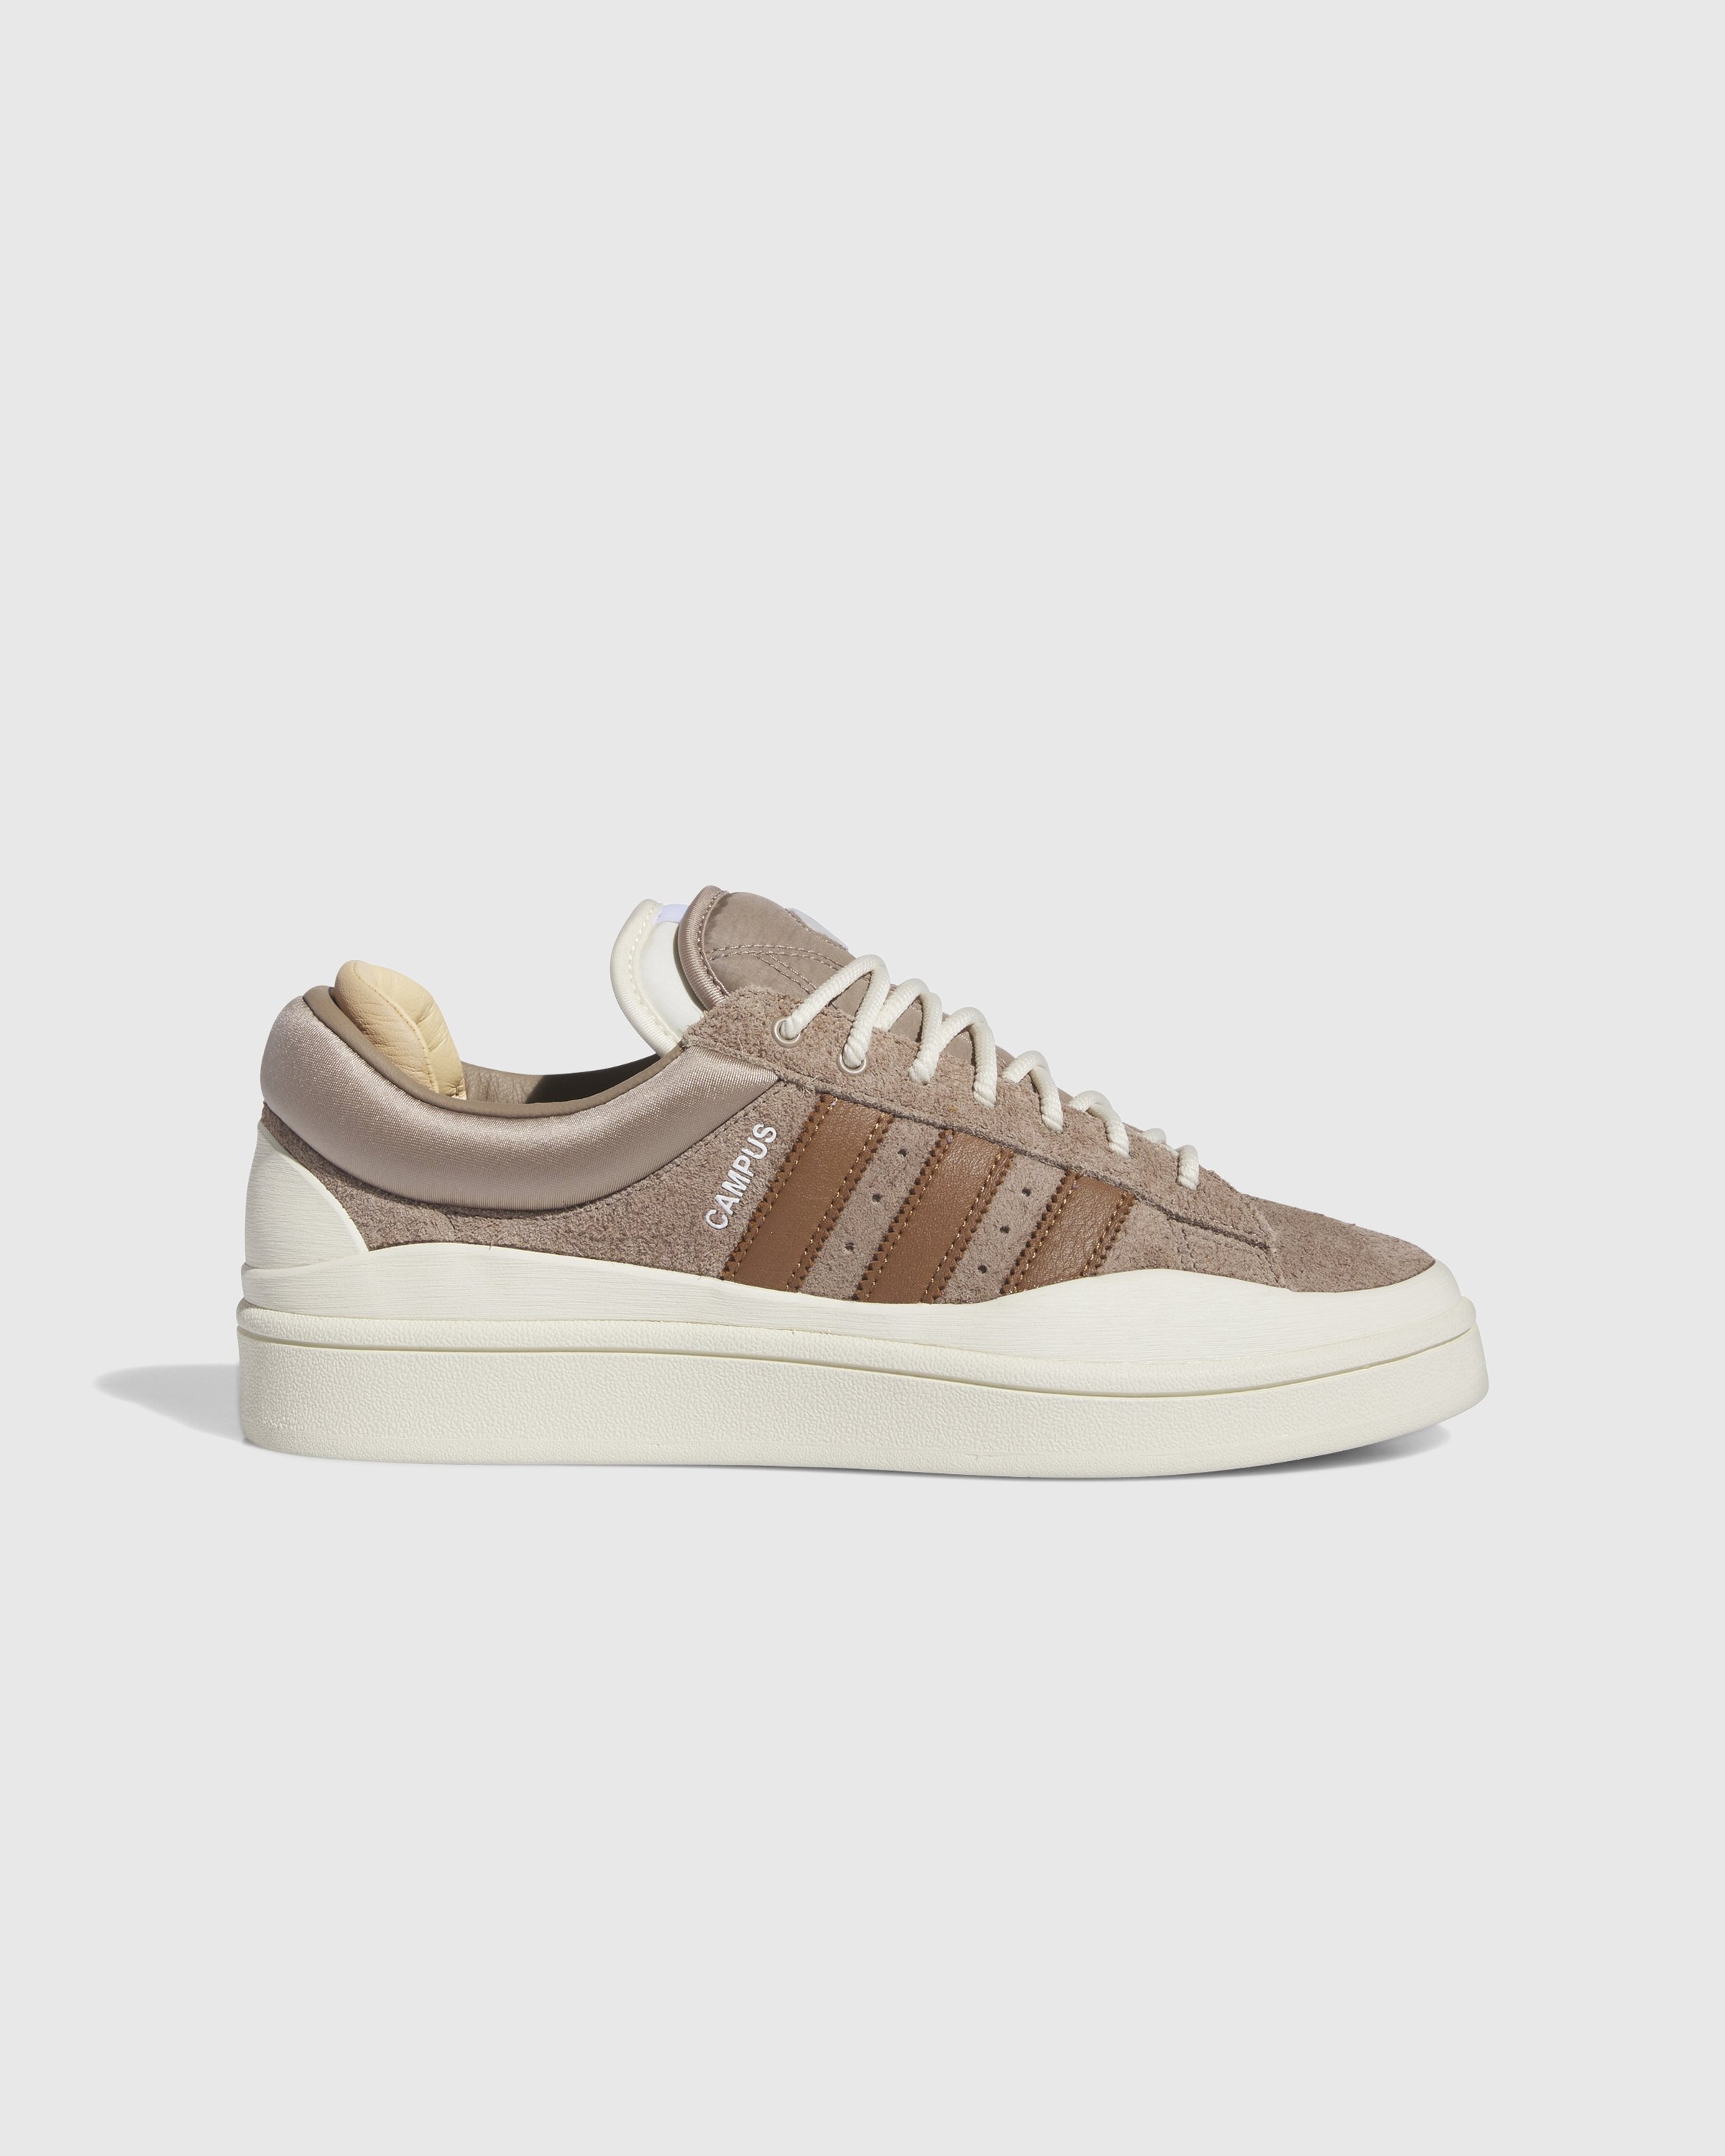 Adidas x Bad Bunny – Campus Chalky Brown - Sneakers - White - Image 1